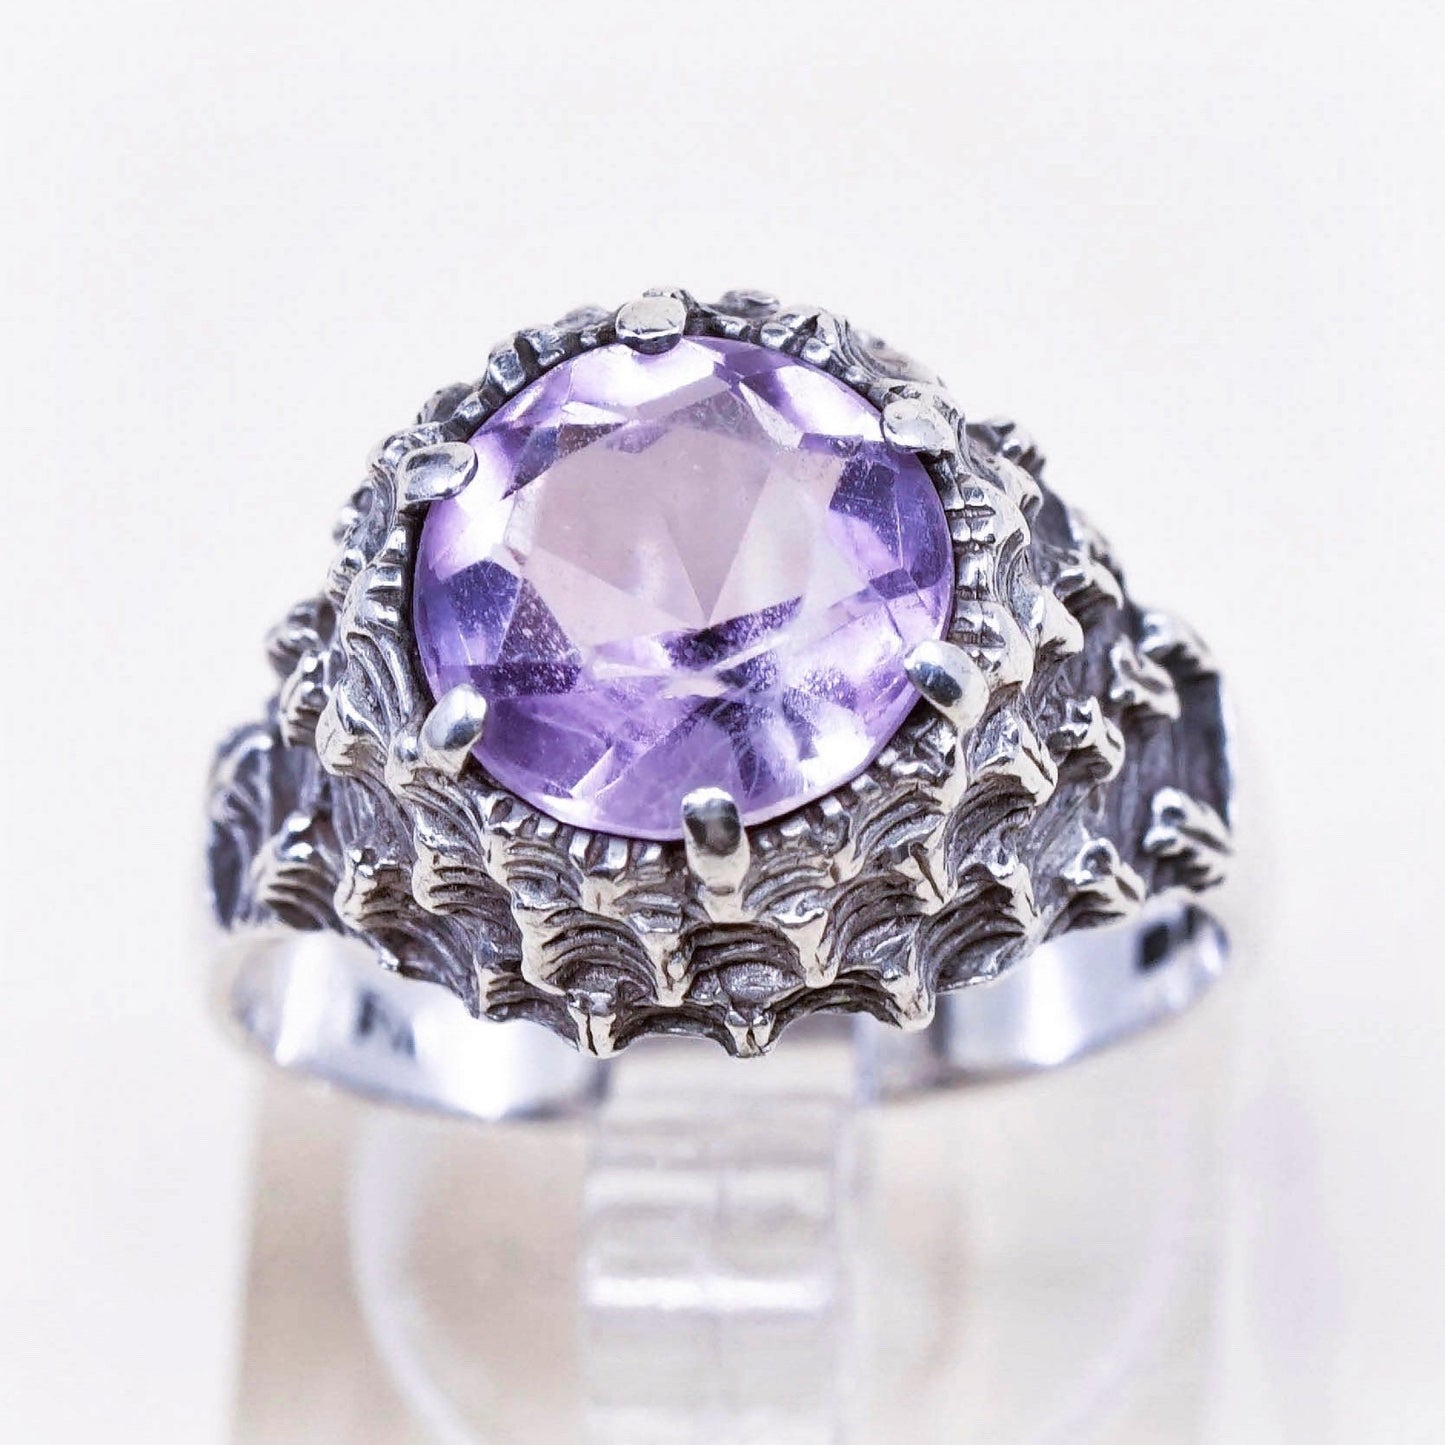 Size 6, vintage Sterling 925 silver handmade crown ring with amethyst